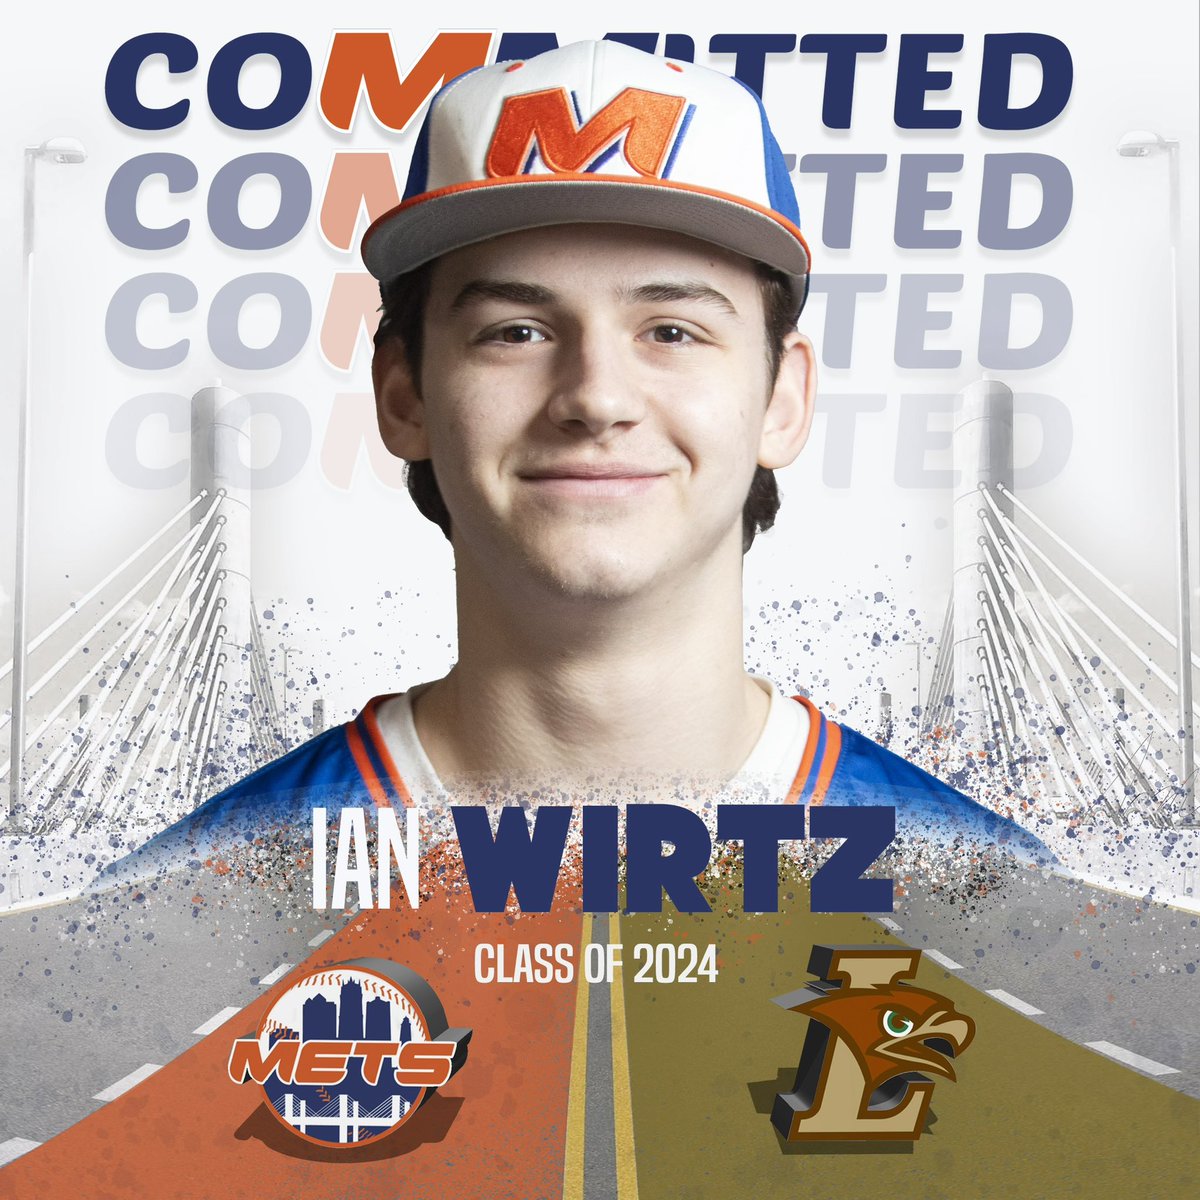 I want to congratulate another one of our players for committing to play Division 1 baseball @ianwirtz2023 2024 catcher committed to @LehighBaseball so proud of you kid! Hard work pays off!!! #d1 #collegebaseball #division1baseaball #proud #ctmetsbaseball